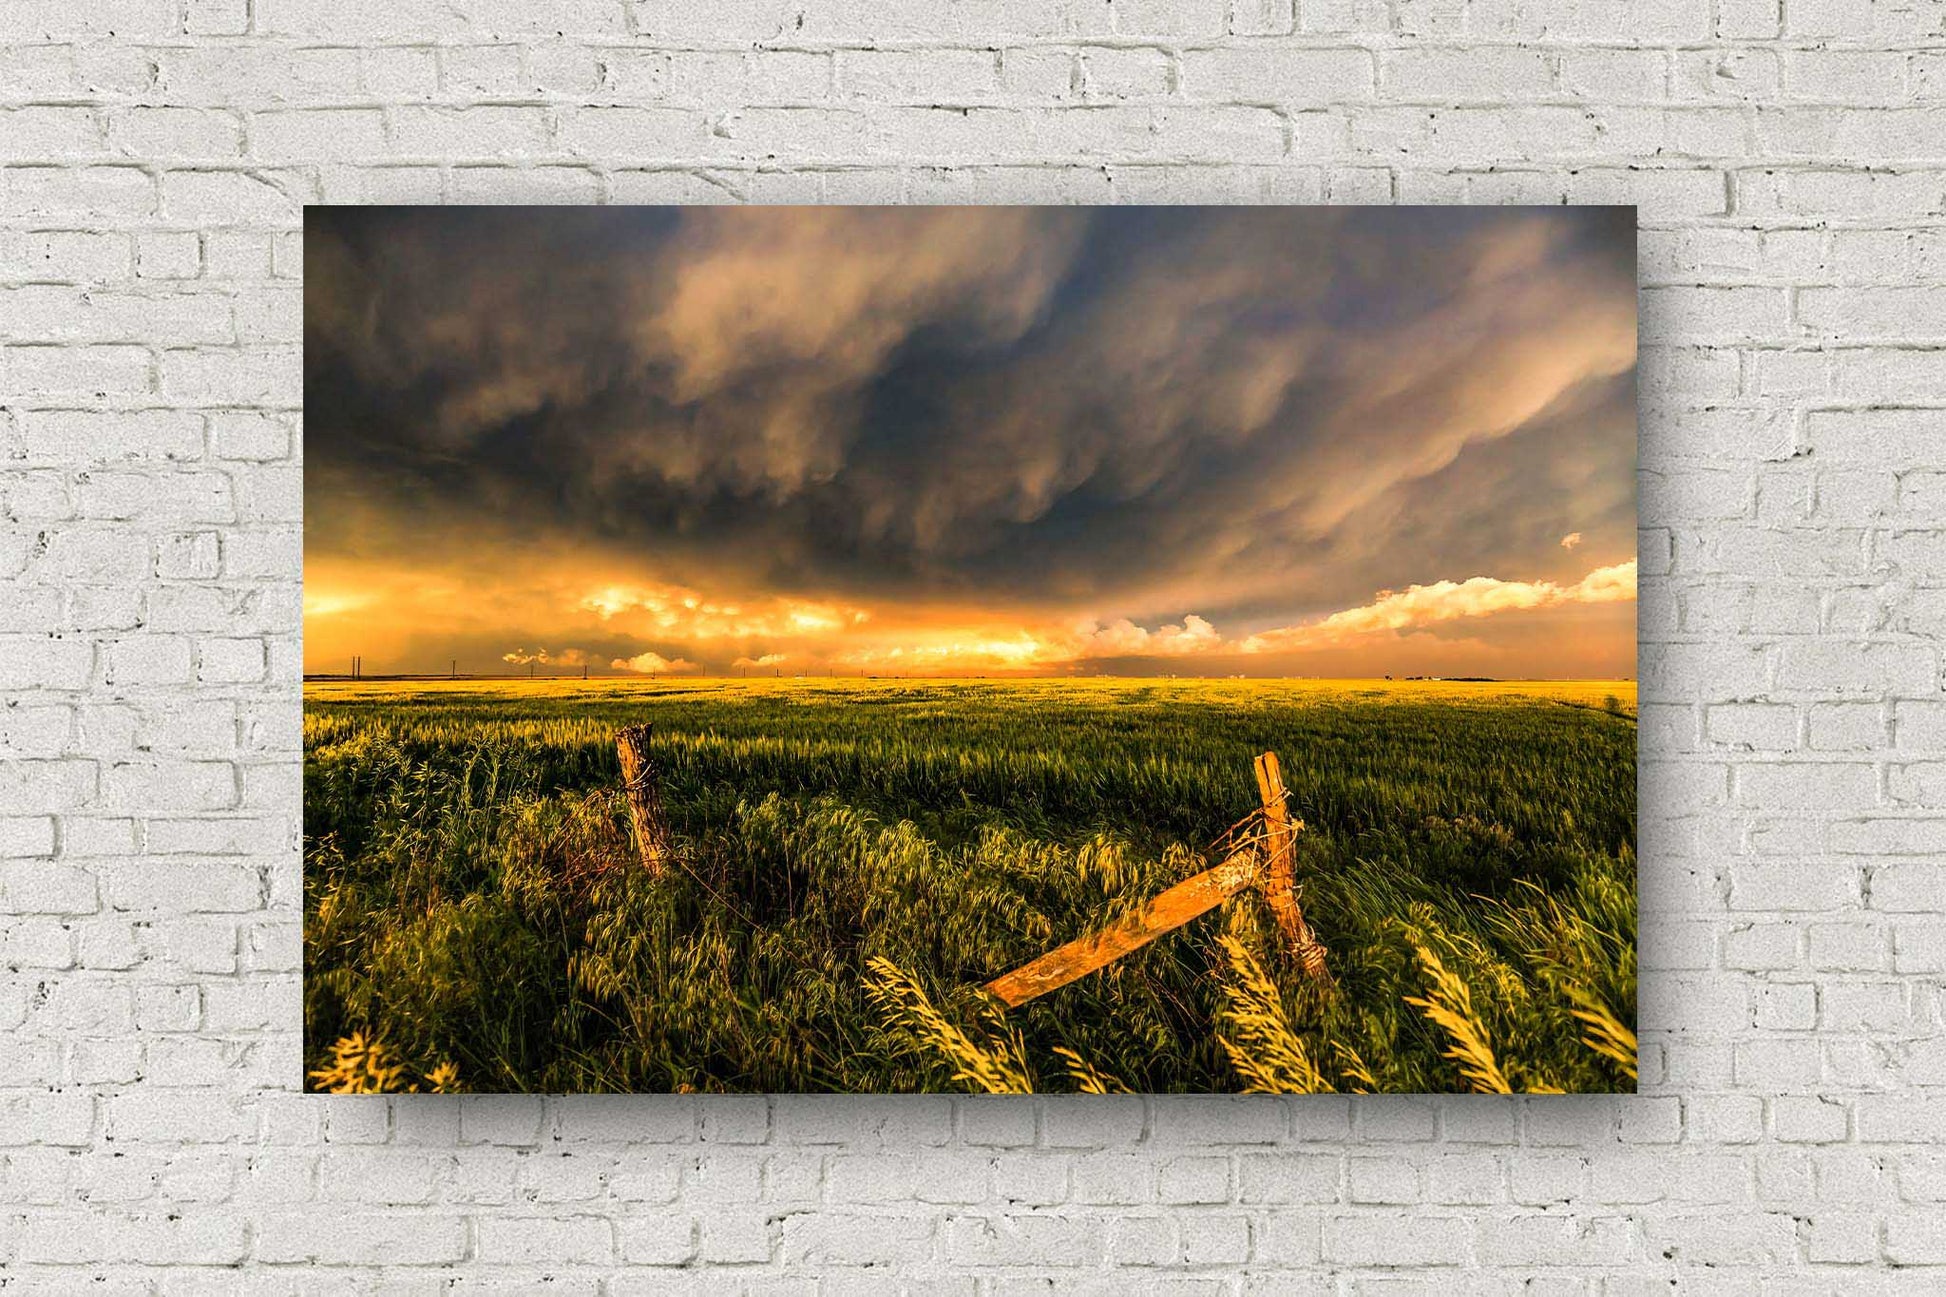 Great Plains metal print of storm clouds illuminated by sunlight over a wheat field on a stormy spring evening in Kansas by Sean Ramsey of Southern Plains Photography.